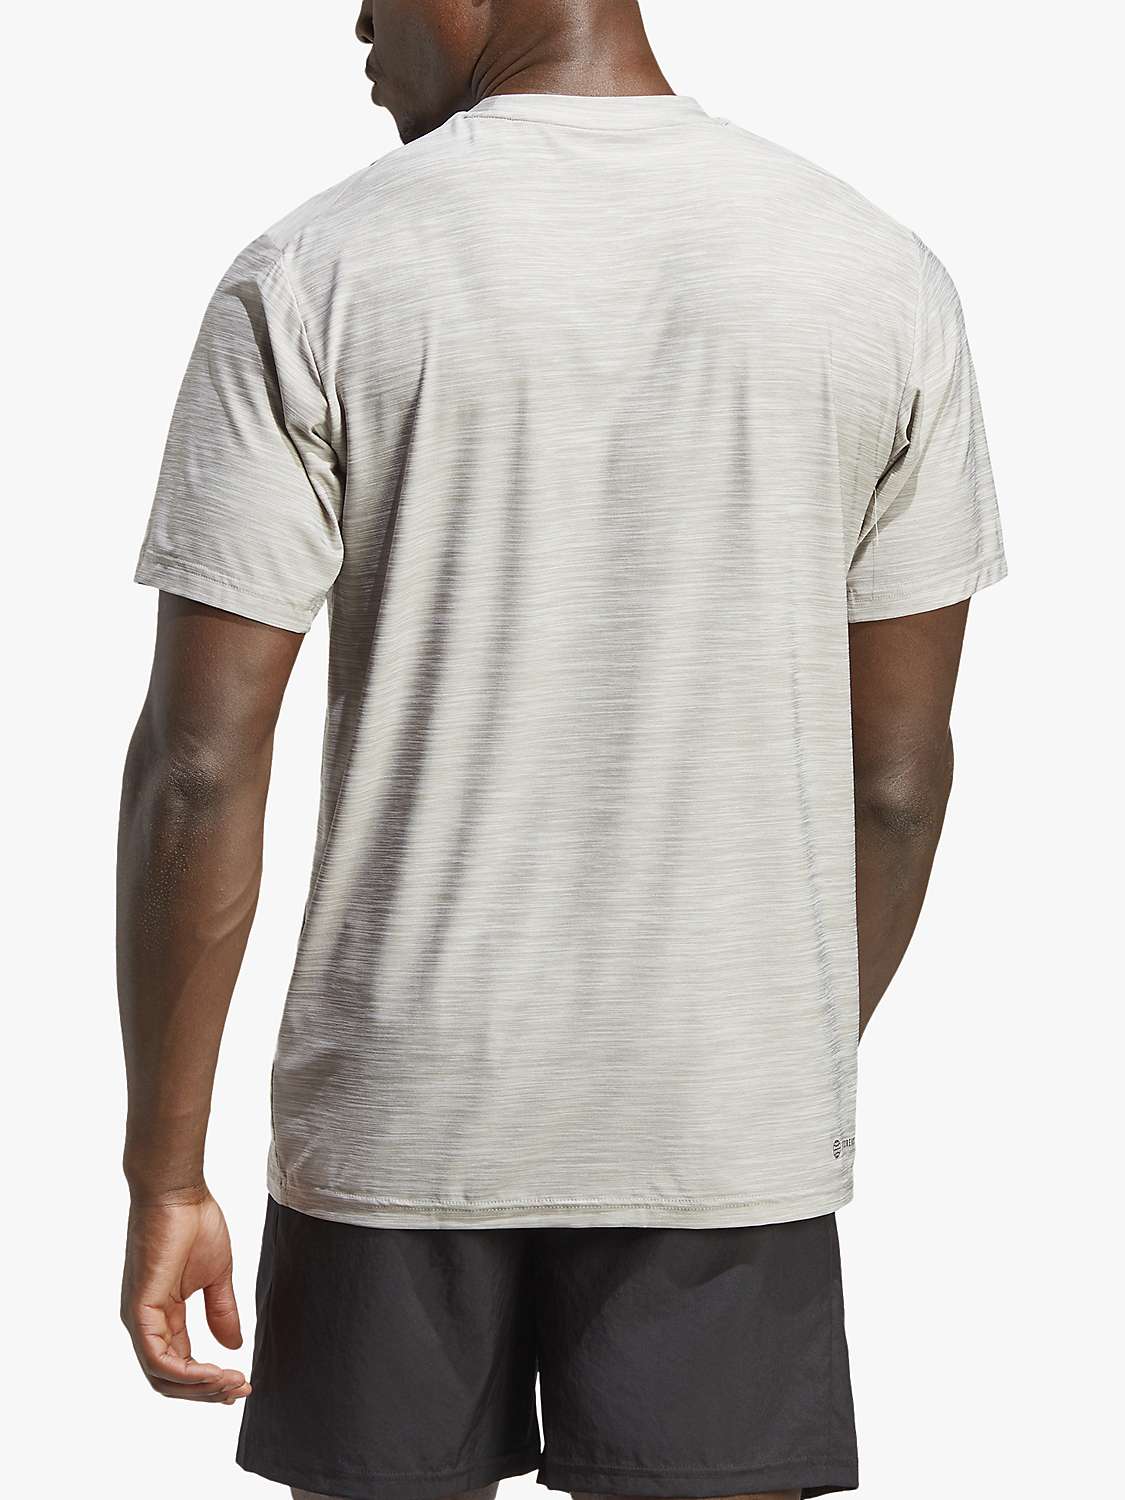 Buy adidas Train Essentials Stretch Recycled Gym Top Online at johnlewis.com